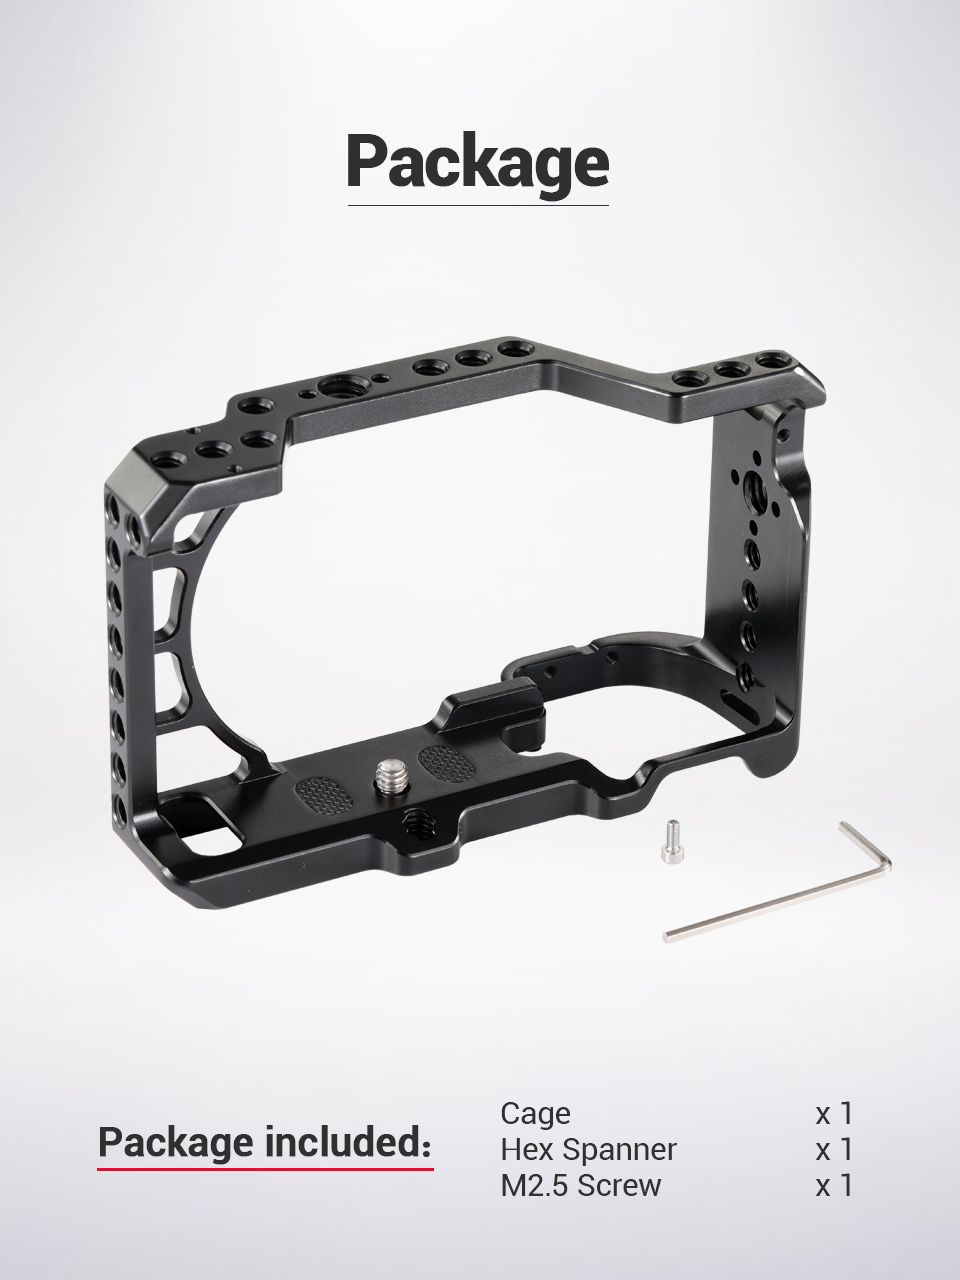 SmallRig-2310-Camera-Cage-Stabilizer-for-Sony-A6300-A6400-A6500-Form-Fitted-DSLR-Camera-Cage-With-14-1763930